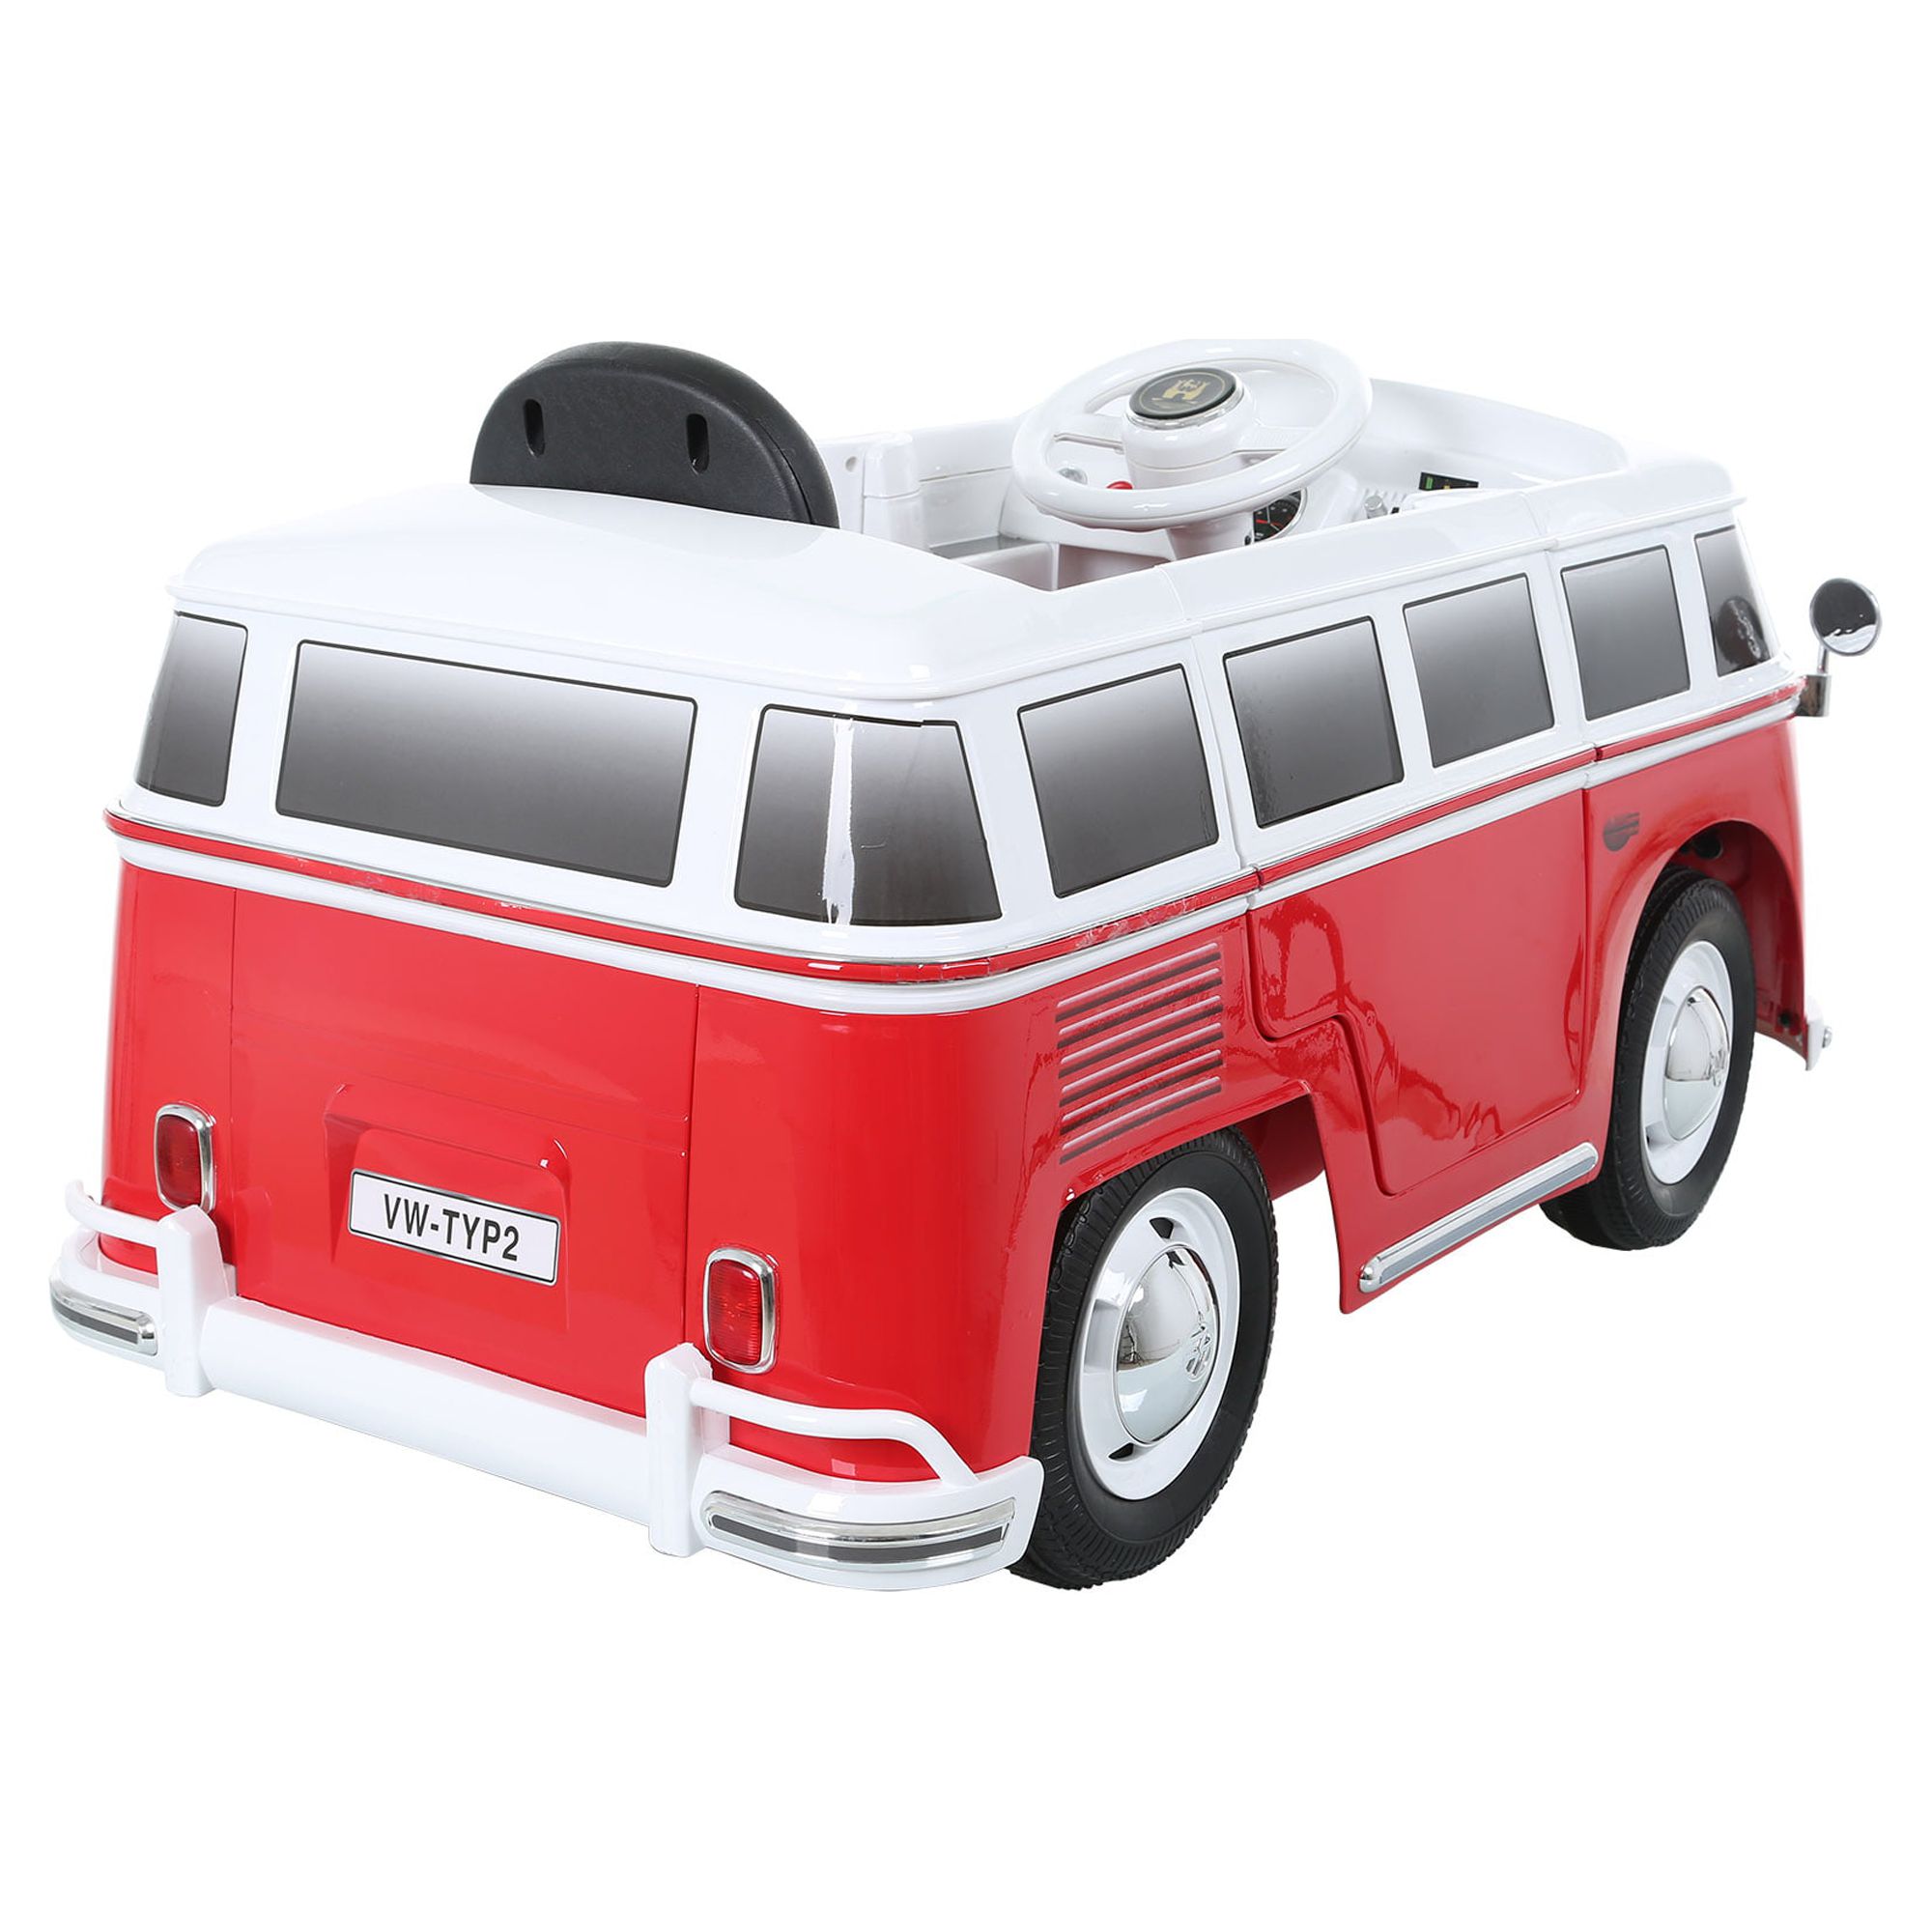 Rollplay VW Bus 6 Volt Battery Powered Ride-on Vehicle - Red - image 4 of 10